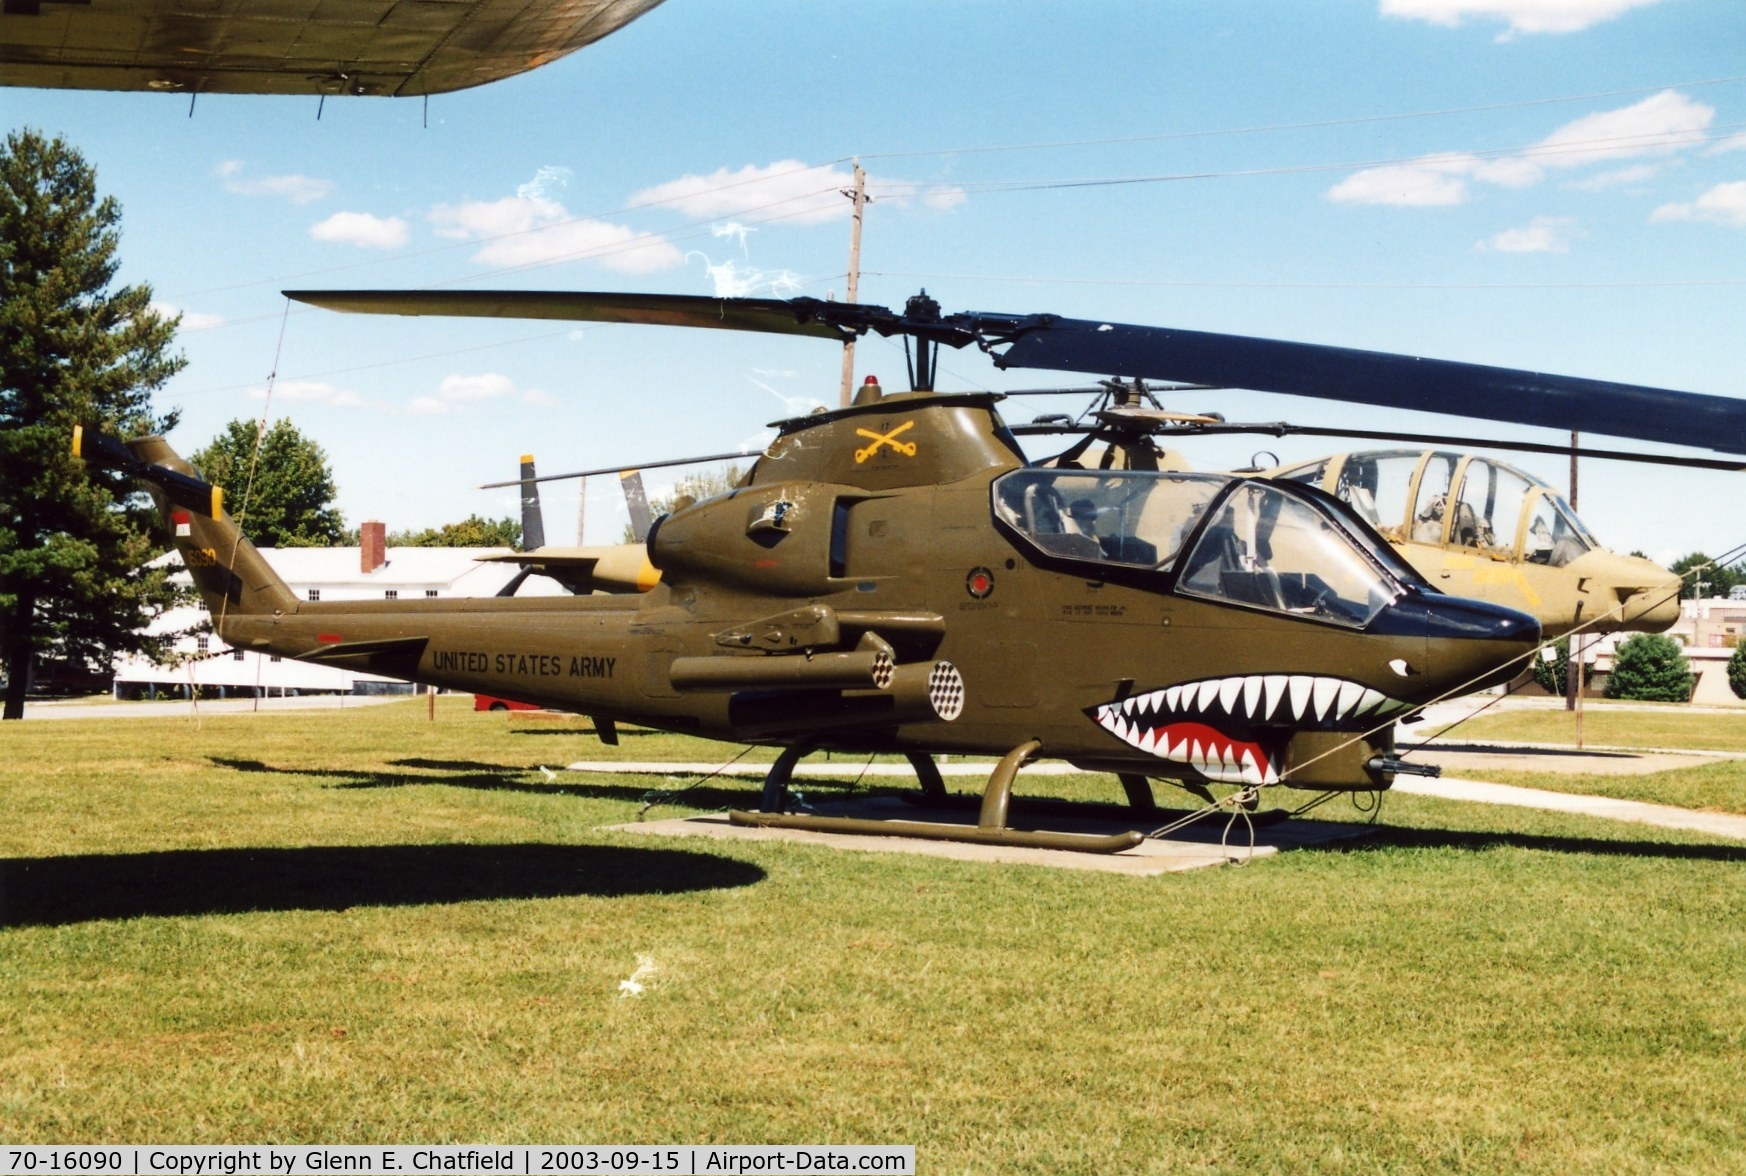 70-16090, 1970 Bell AH-1S Cobra C/N 21034, AH-1S at the 101st Airborne Division Museum, Ft. Campbell, KY